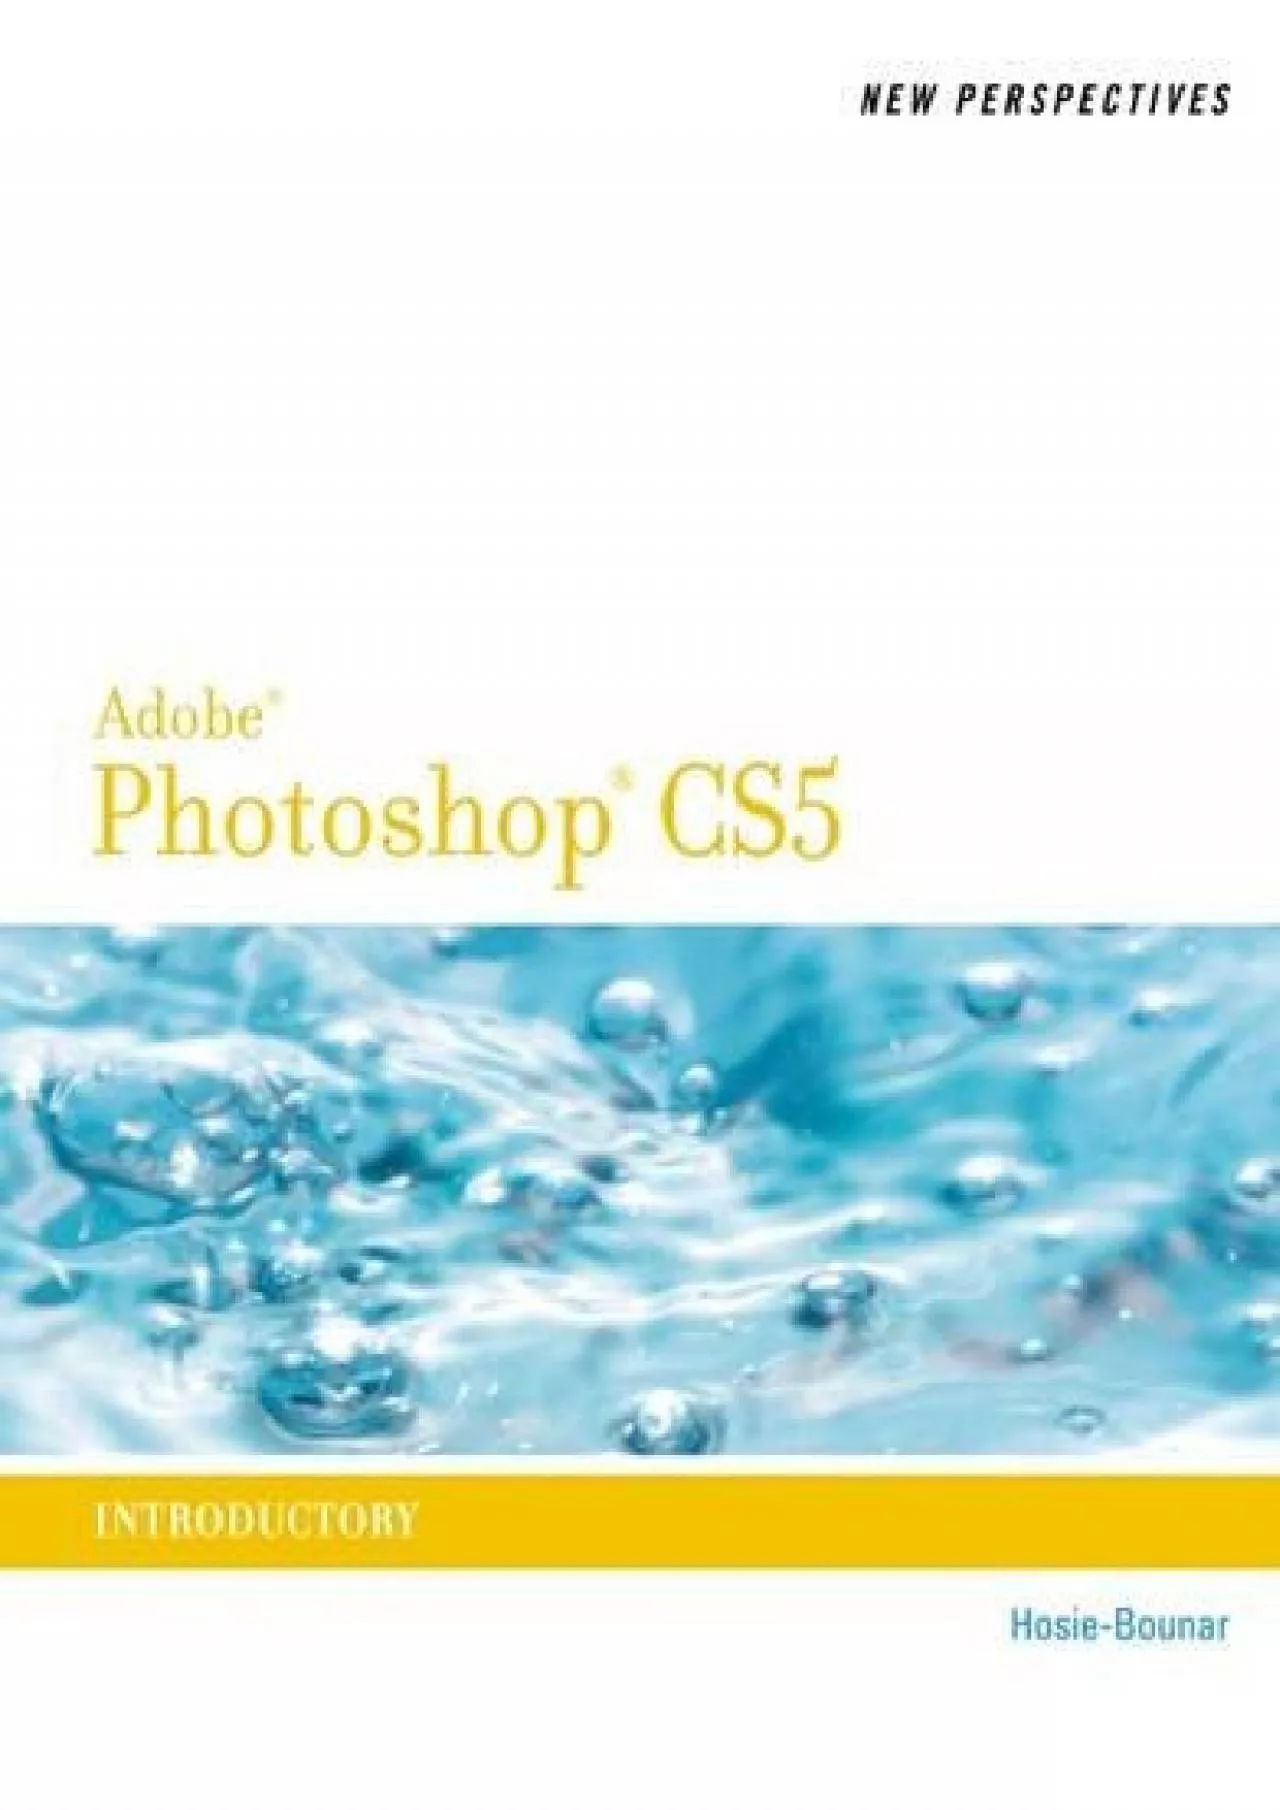 (READ)-New Perspectives on Photoshop CS5: Introductory (New Perspectives Series: Adobe